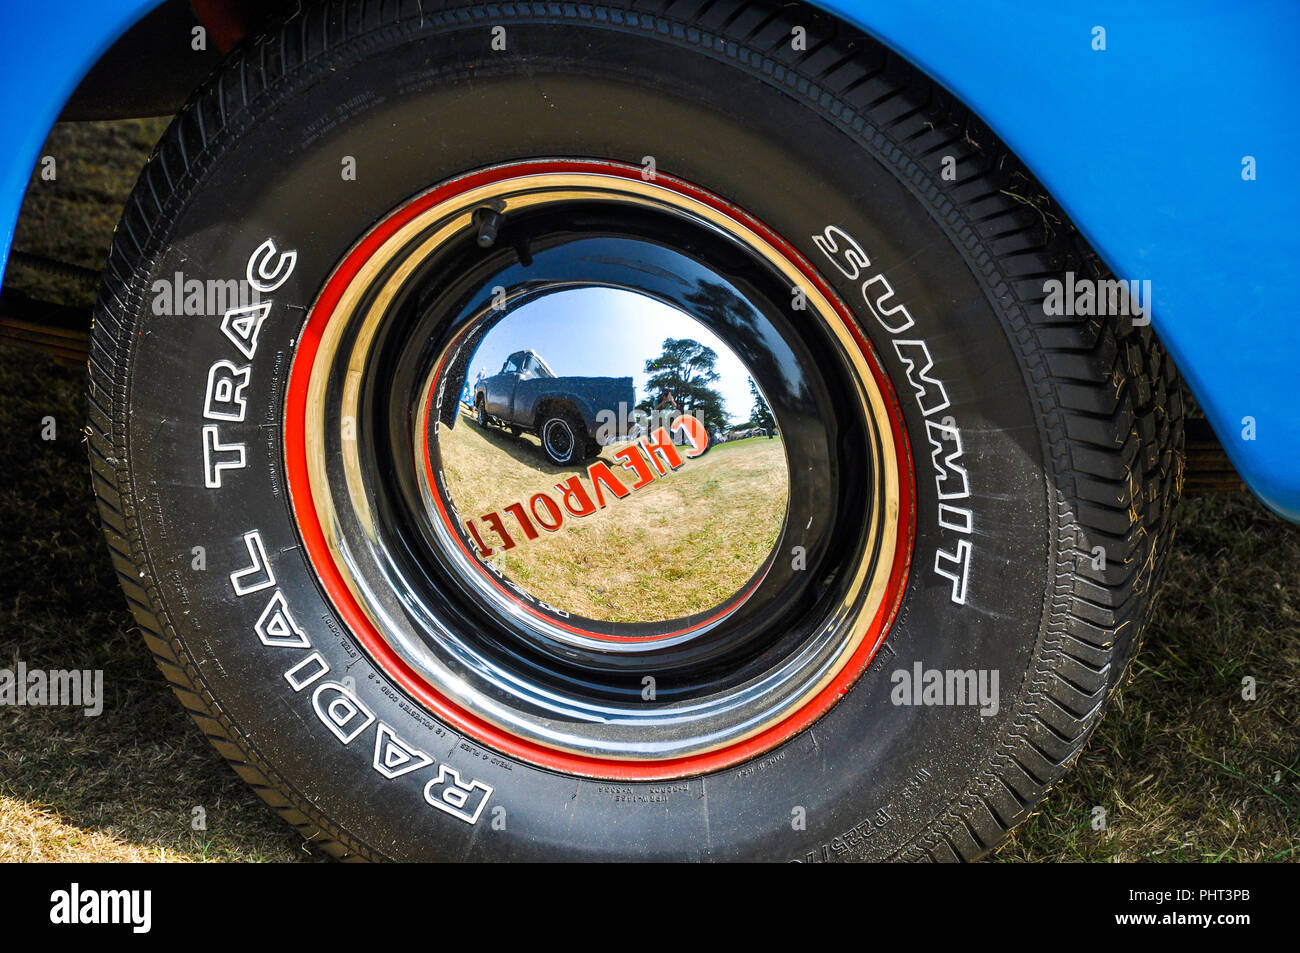 Summit radial trac tyre, tire on a Chevrolet car vehicle with shiny chrome hub cap. Wheel. Truck. Text. Goodwood 2013 Stock Photo